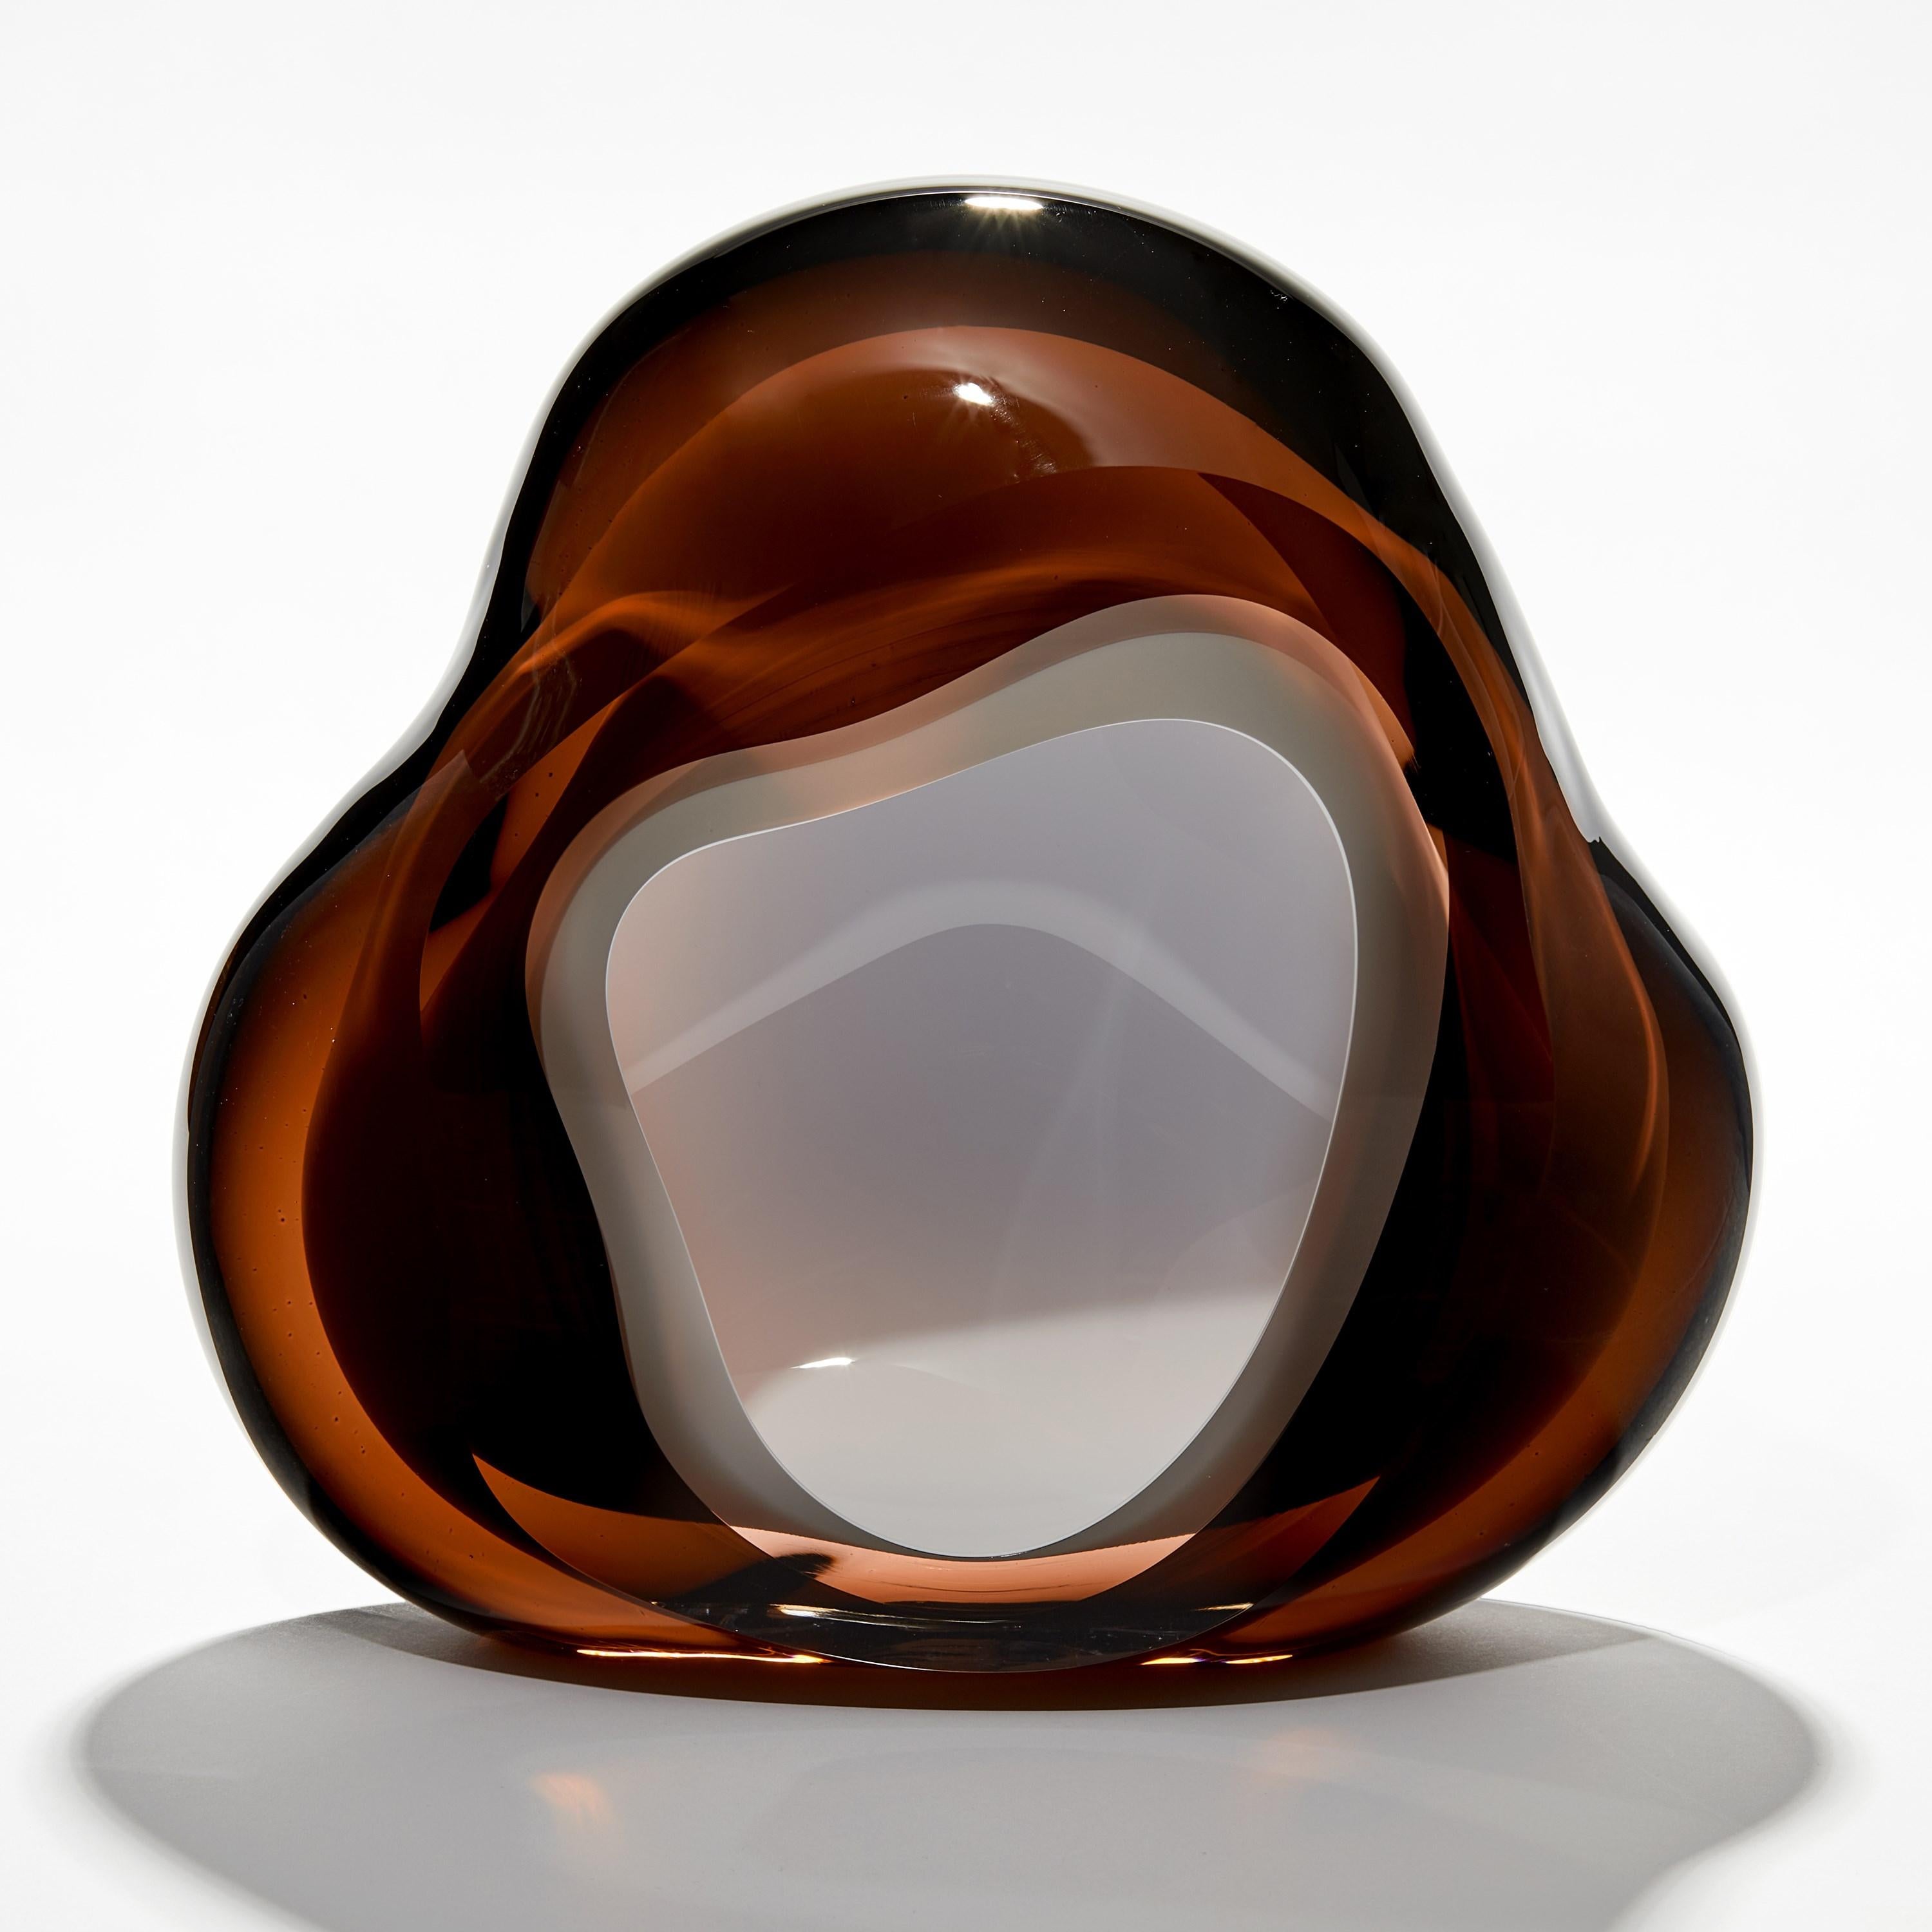 'Chromatic Vug in Dark Amber to Olive' is a unique handblown sculpture by the British artist, Samantha Donaldson.

Created by layers of coloured glass, the transparent colours merge and create further hues throughout the piece. An additional